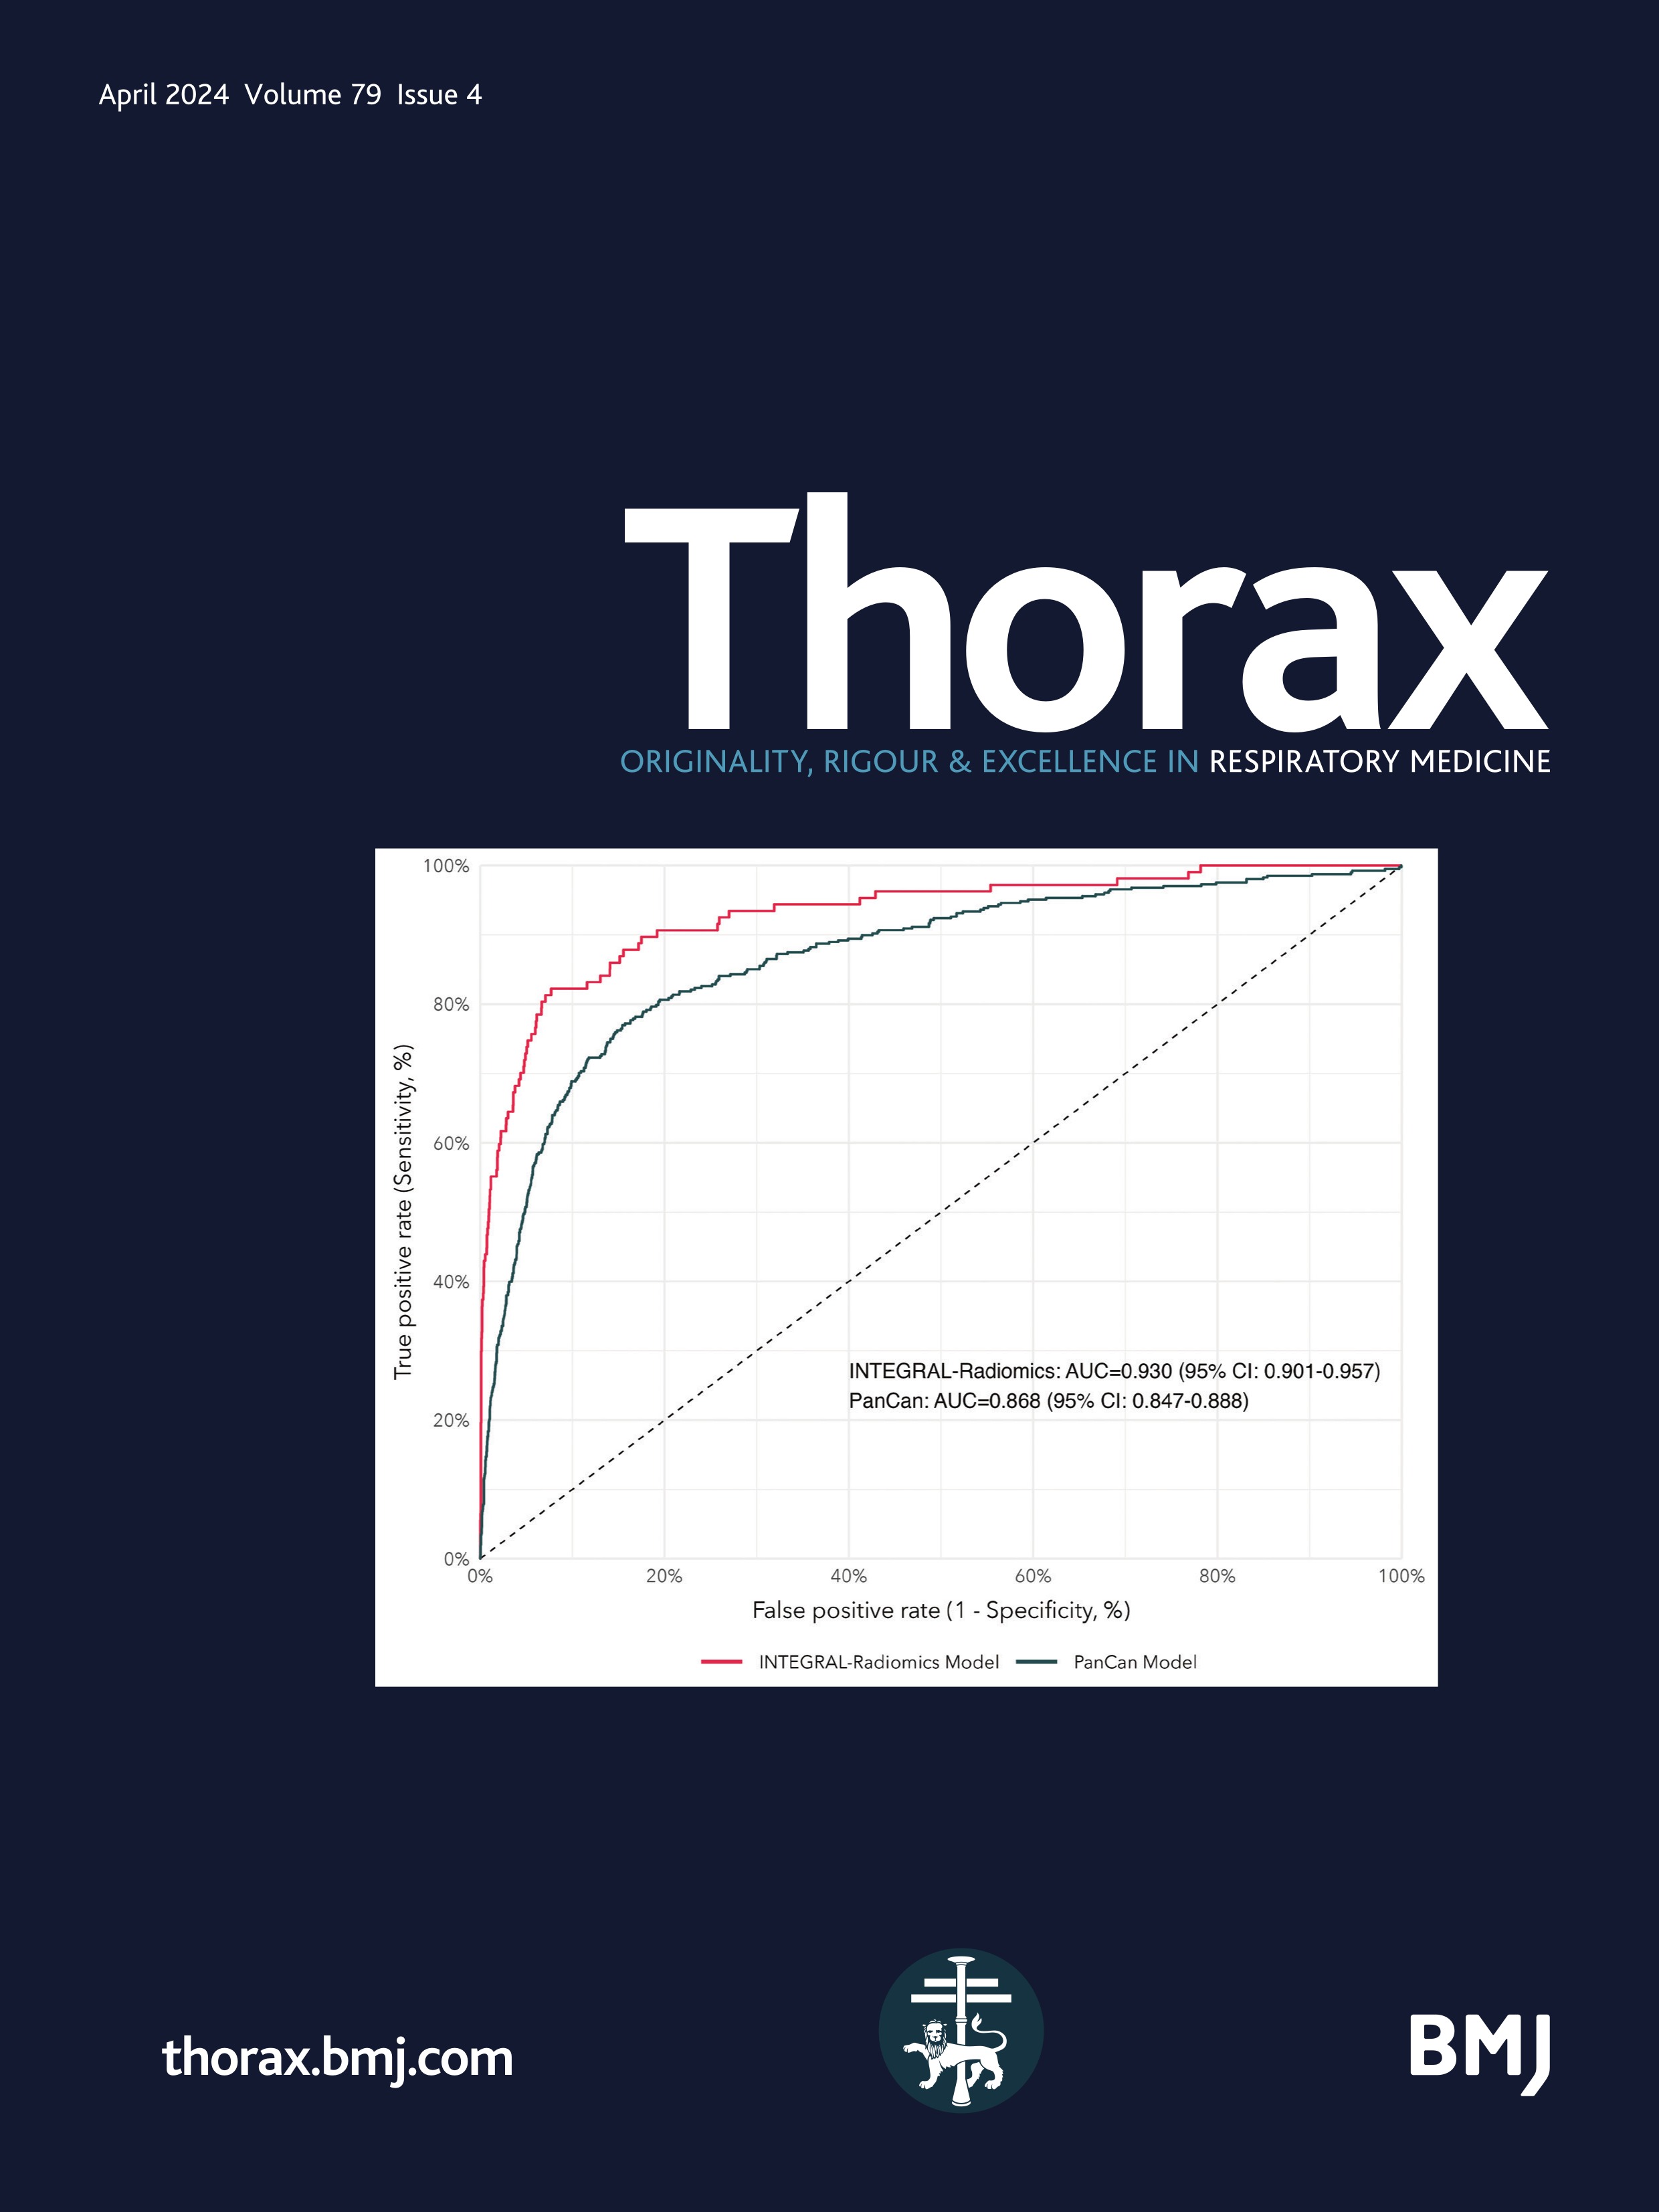 Airway smooth muscle and long-term clinical efficacy following bronchial thermoplasty in severe asthma